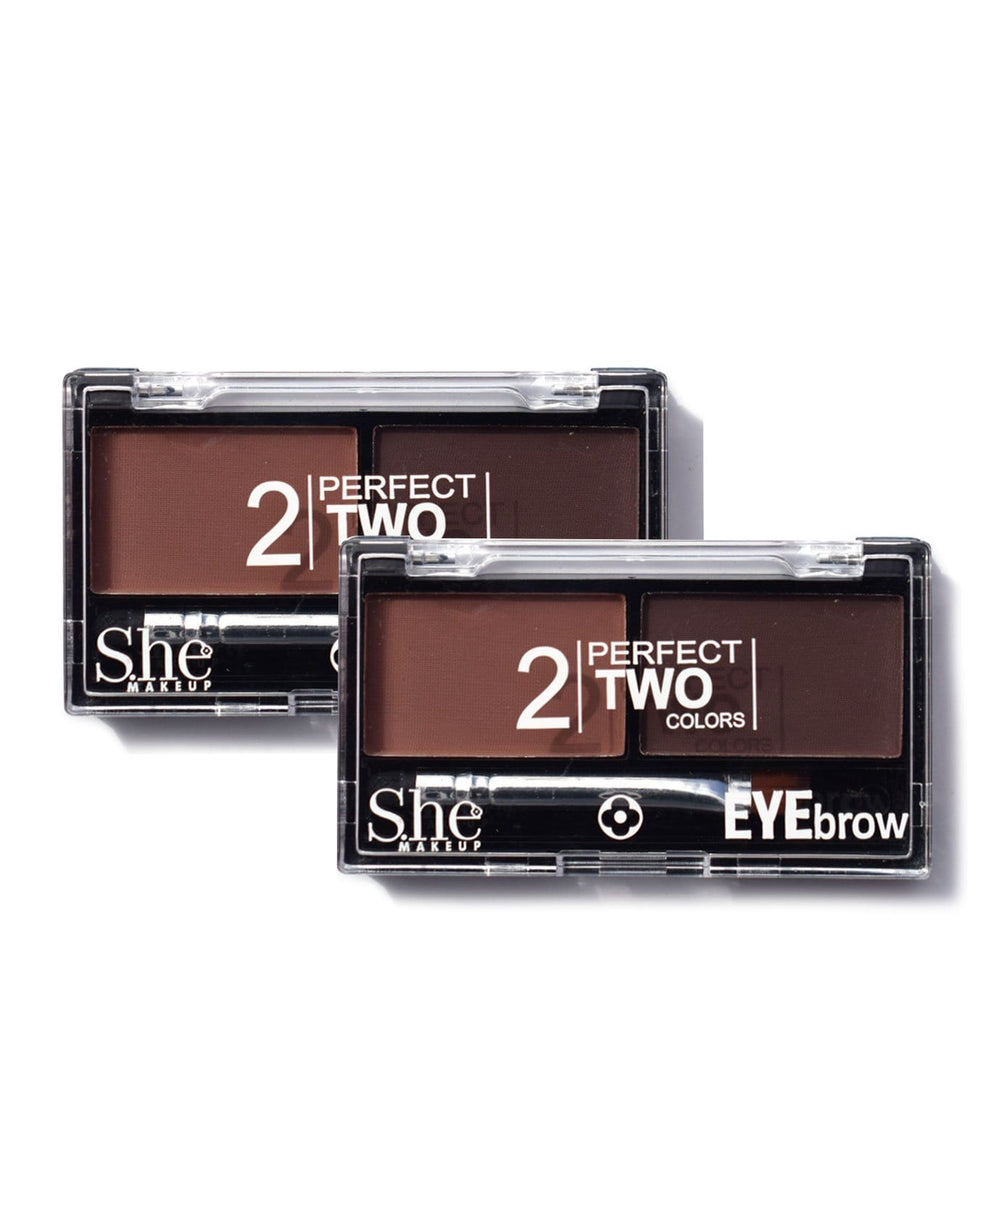 S.he 2 Perfect Eyebrow Palette